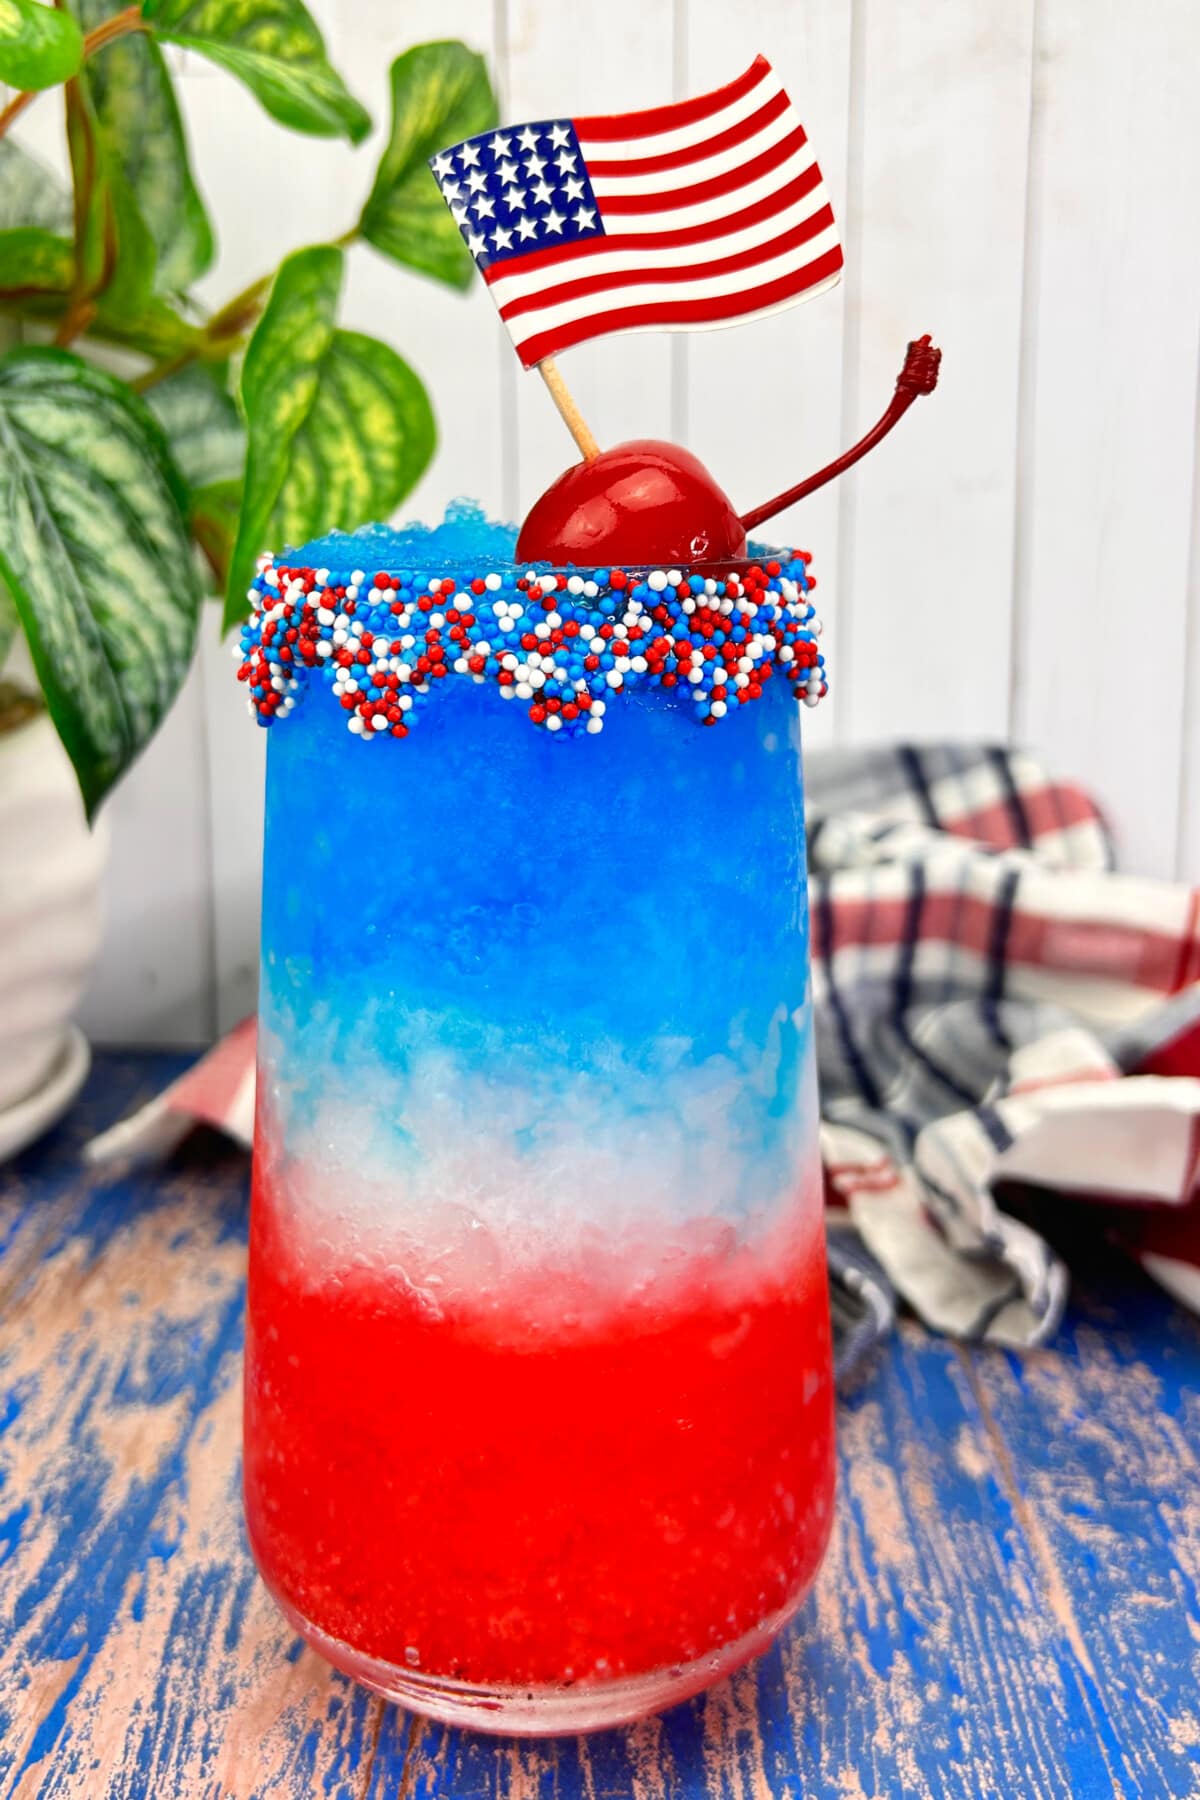 Red White and Blue Margaritas on a blue wooden table.

